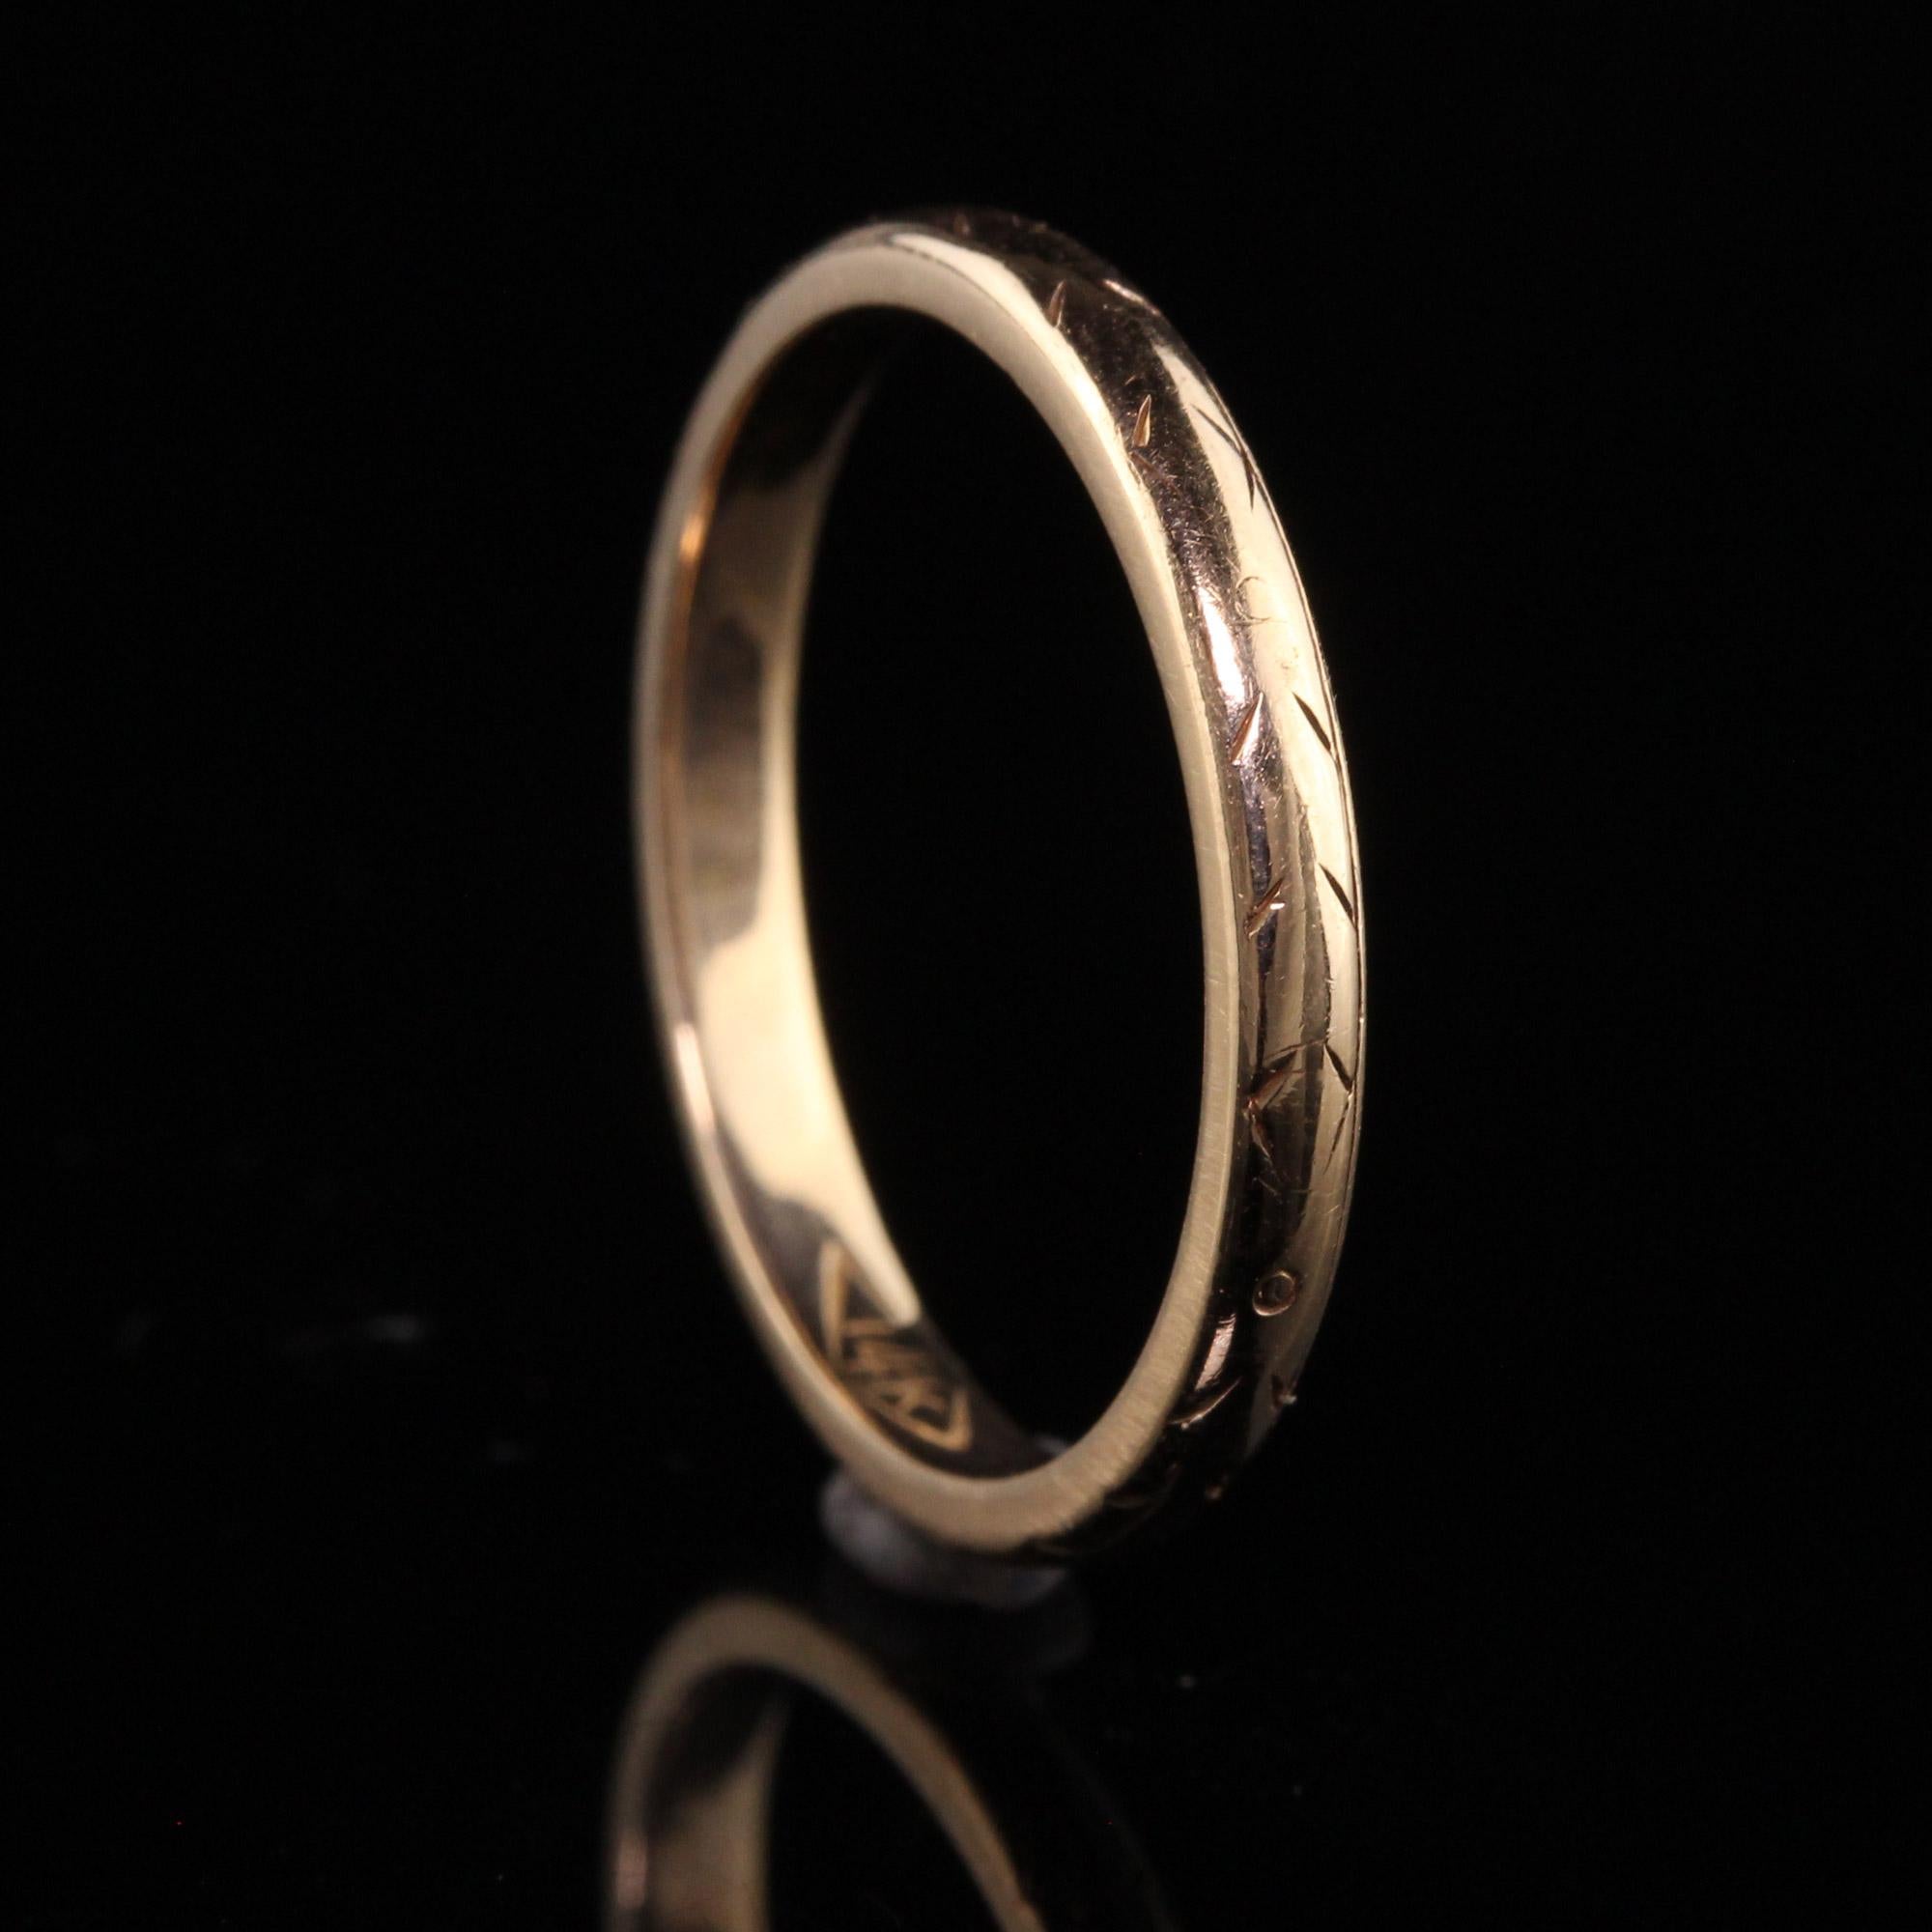 Antique Art Deco 14K Yellow Gold Engraved Wedding Band In Good Condition For Sale In Great Neck, NY